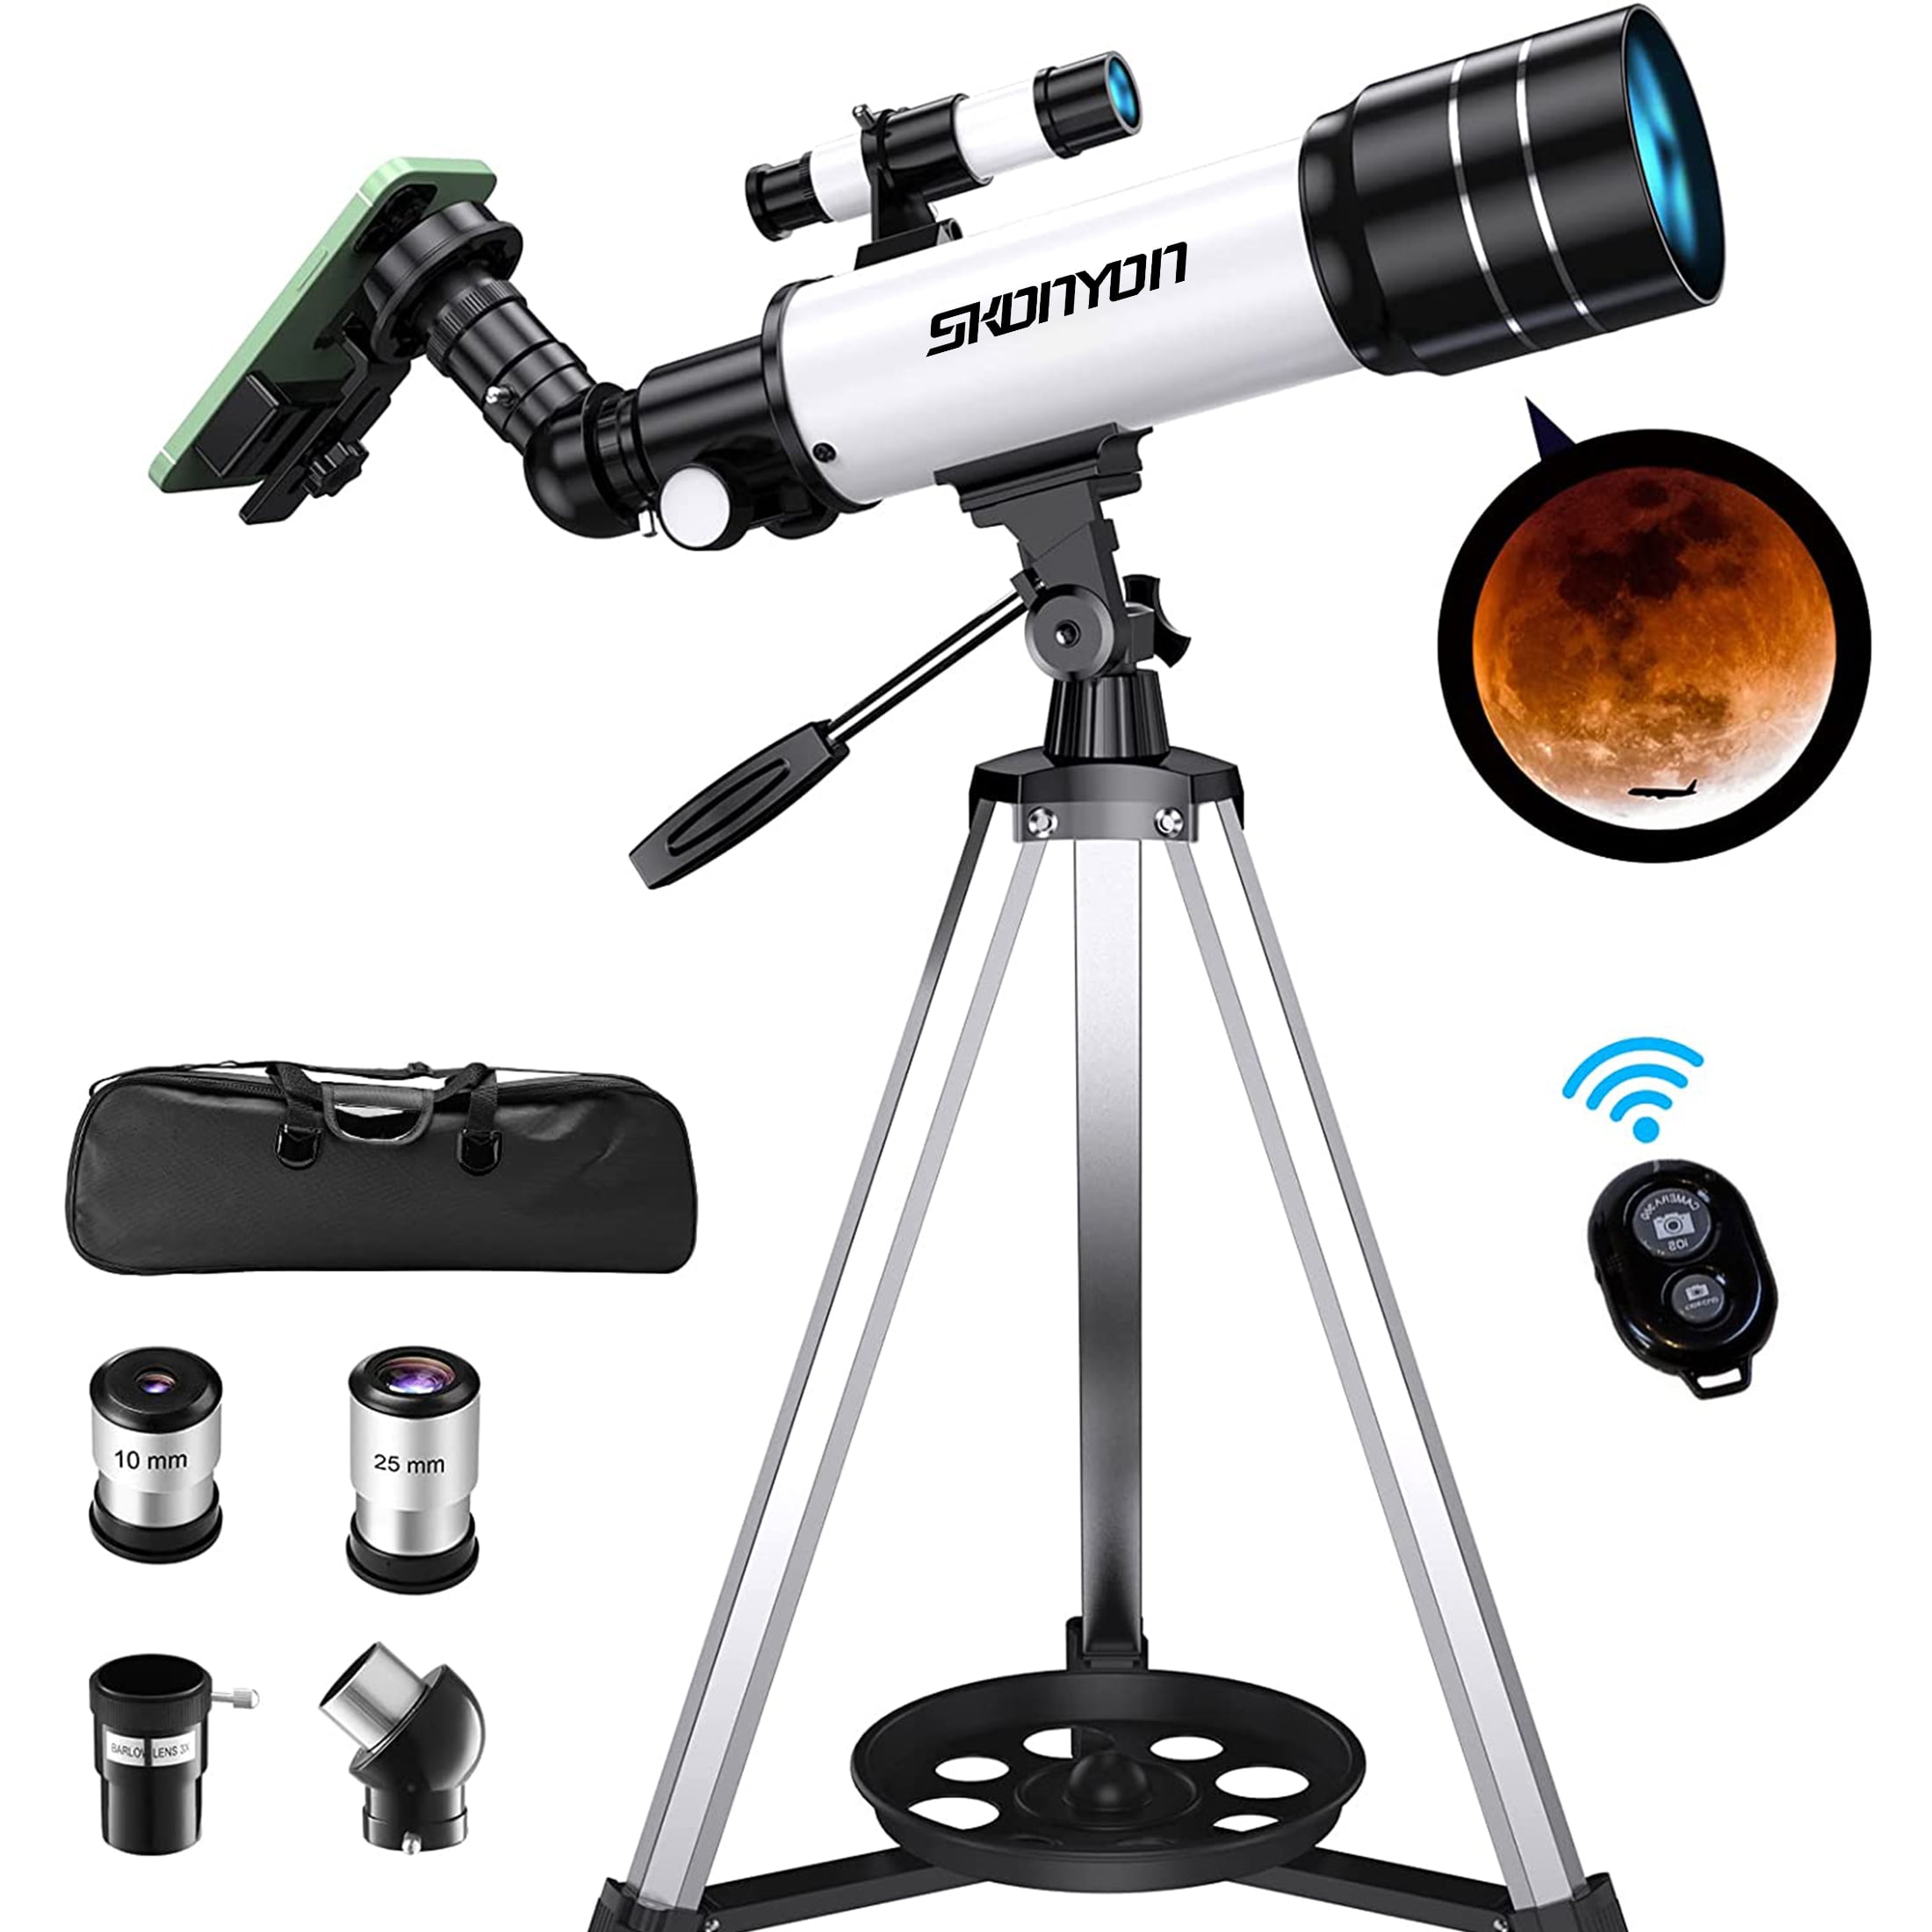 Travel Scope Gskyer Telescope 70mm Aperture 400mm AZ Mount Astronomical Refractor Telescope for Kids Beginners Portable Travel Telescope with Carry Bag Smartphone Adapter and Wireless Remote